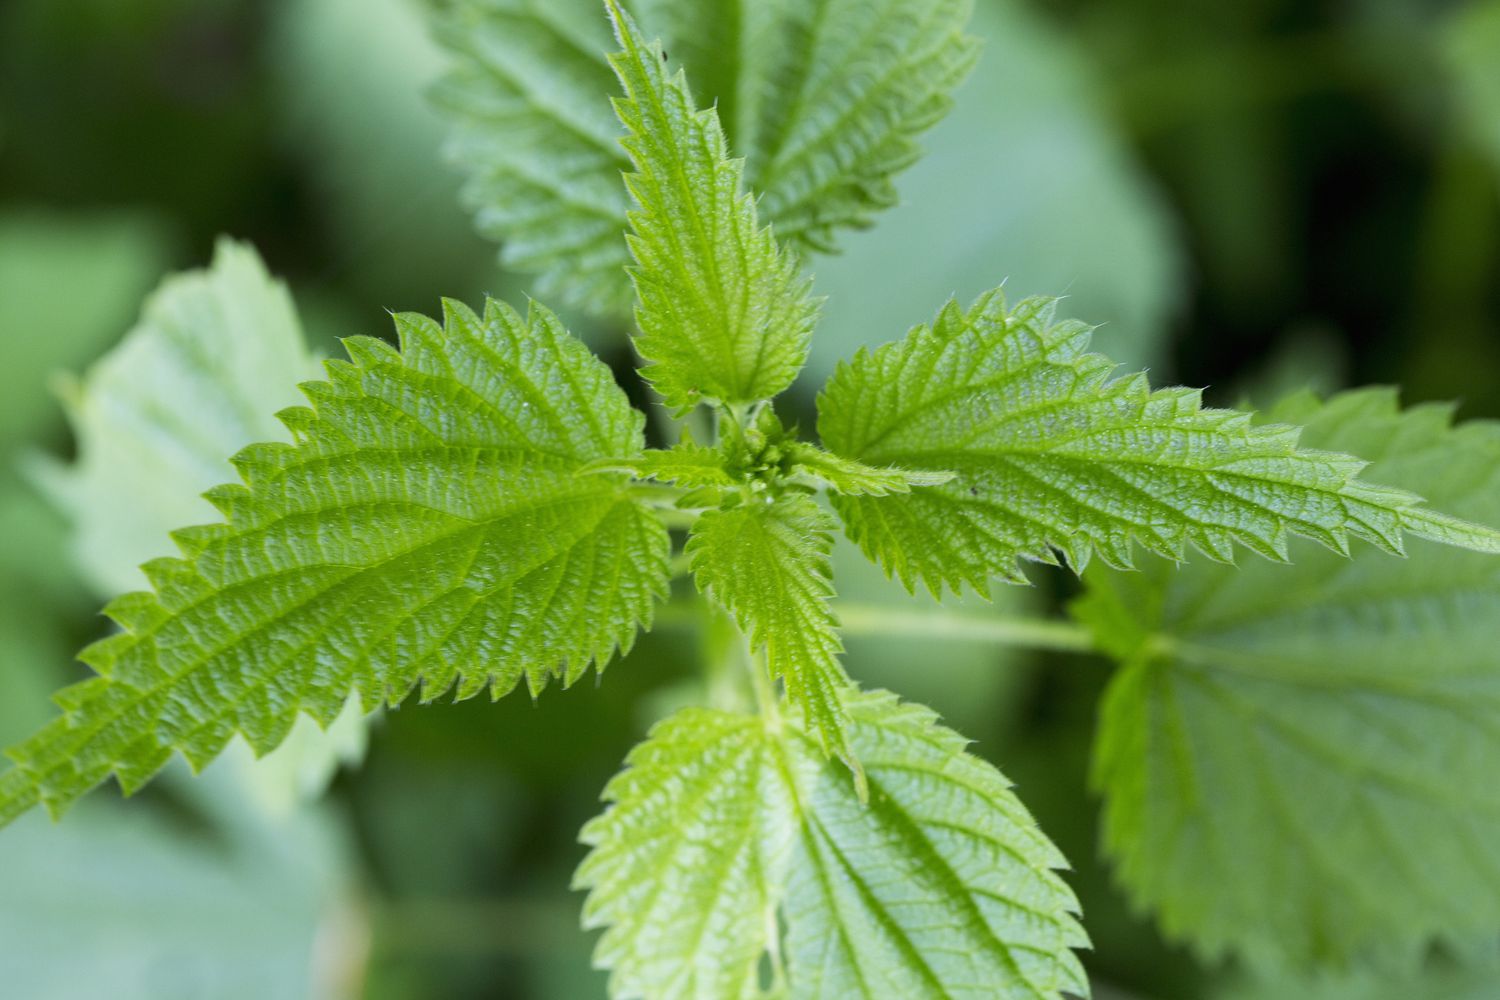 Closeup of leaves of stinging nettles.